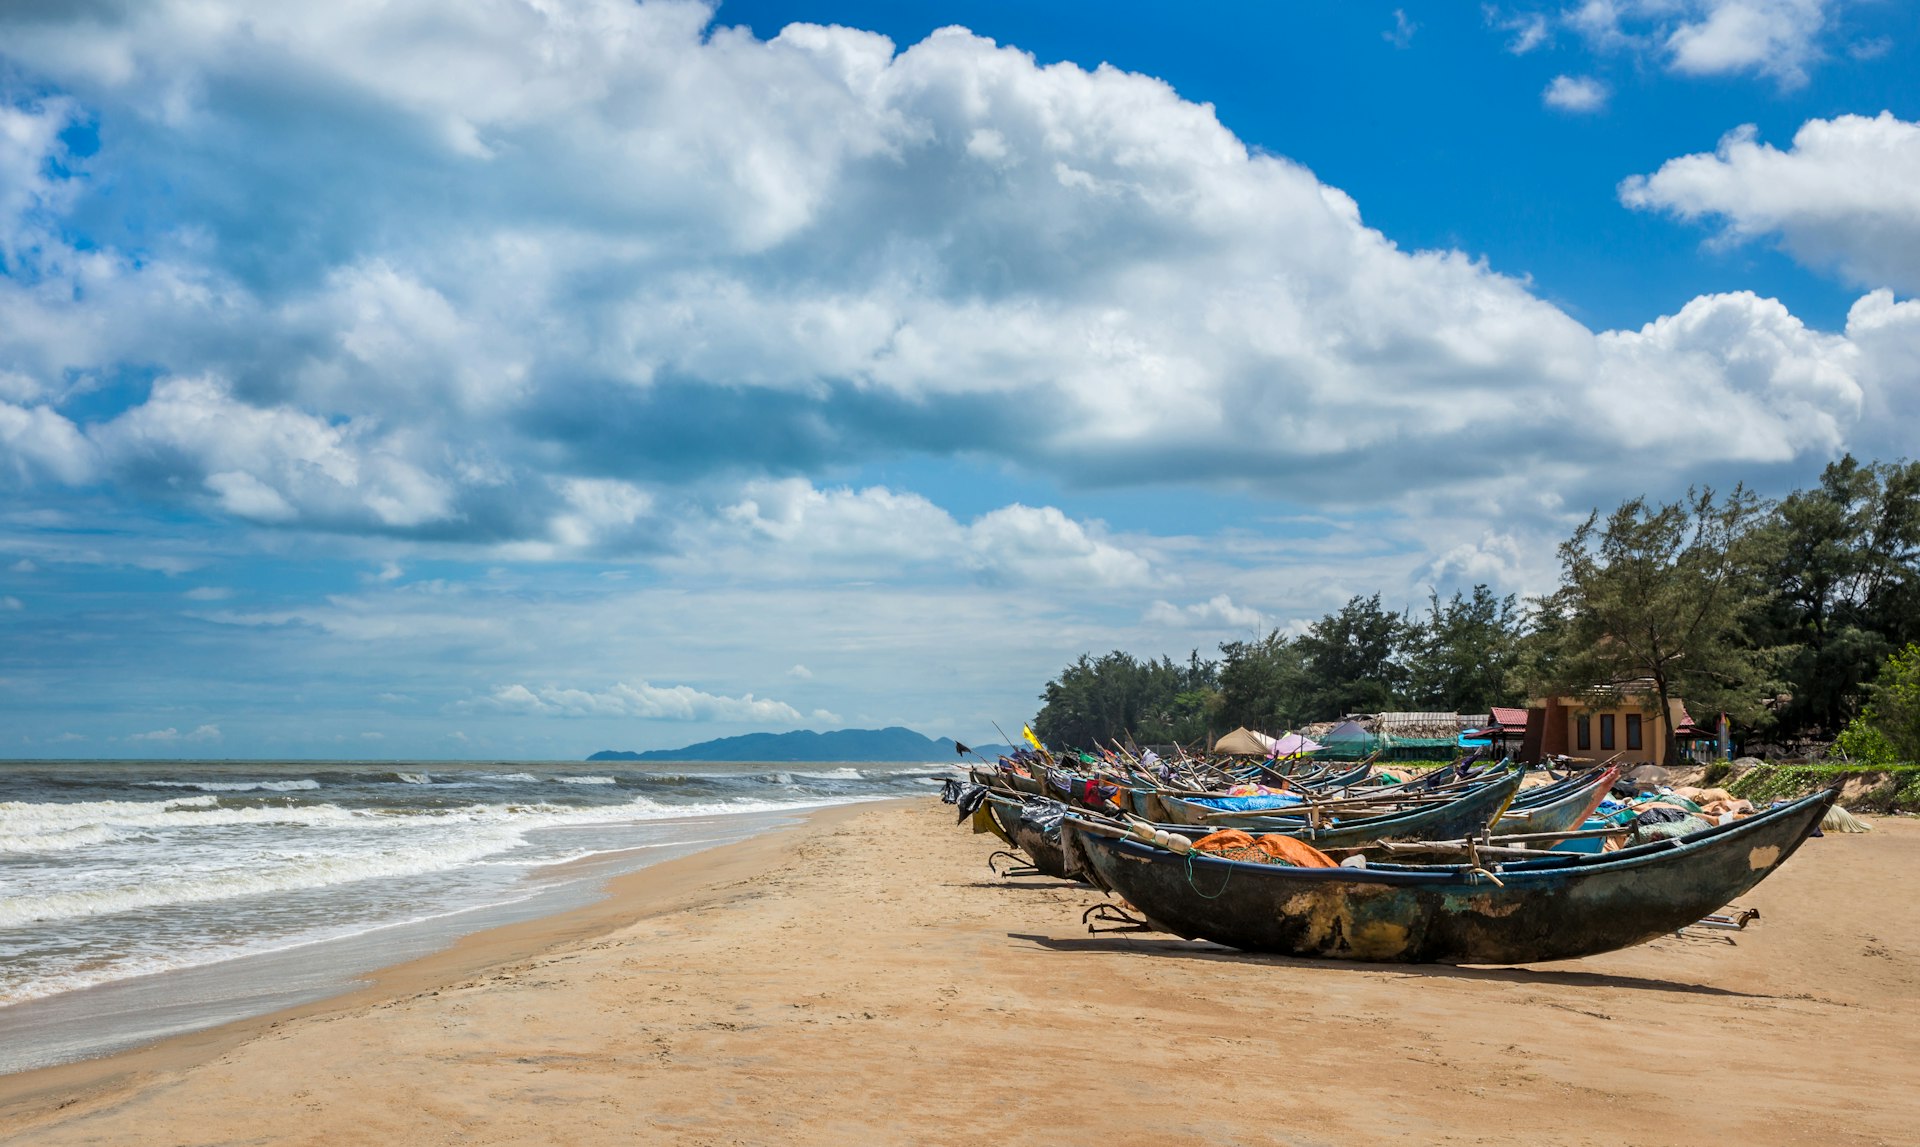 A number of fishing boats on the golden sands of Ho Coc beach, Vietnam